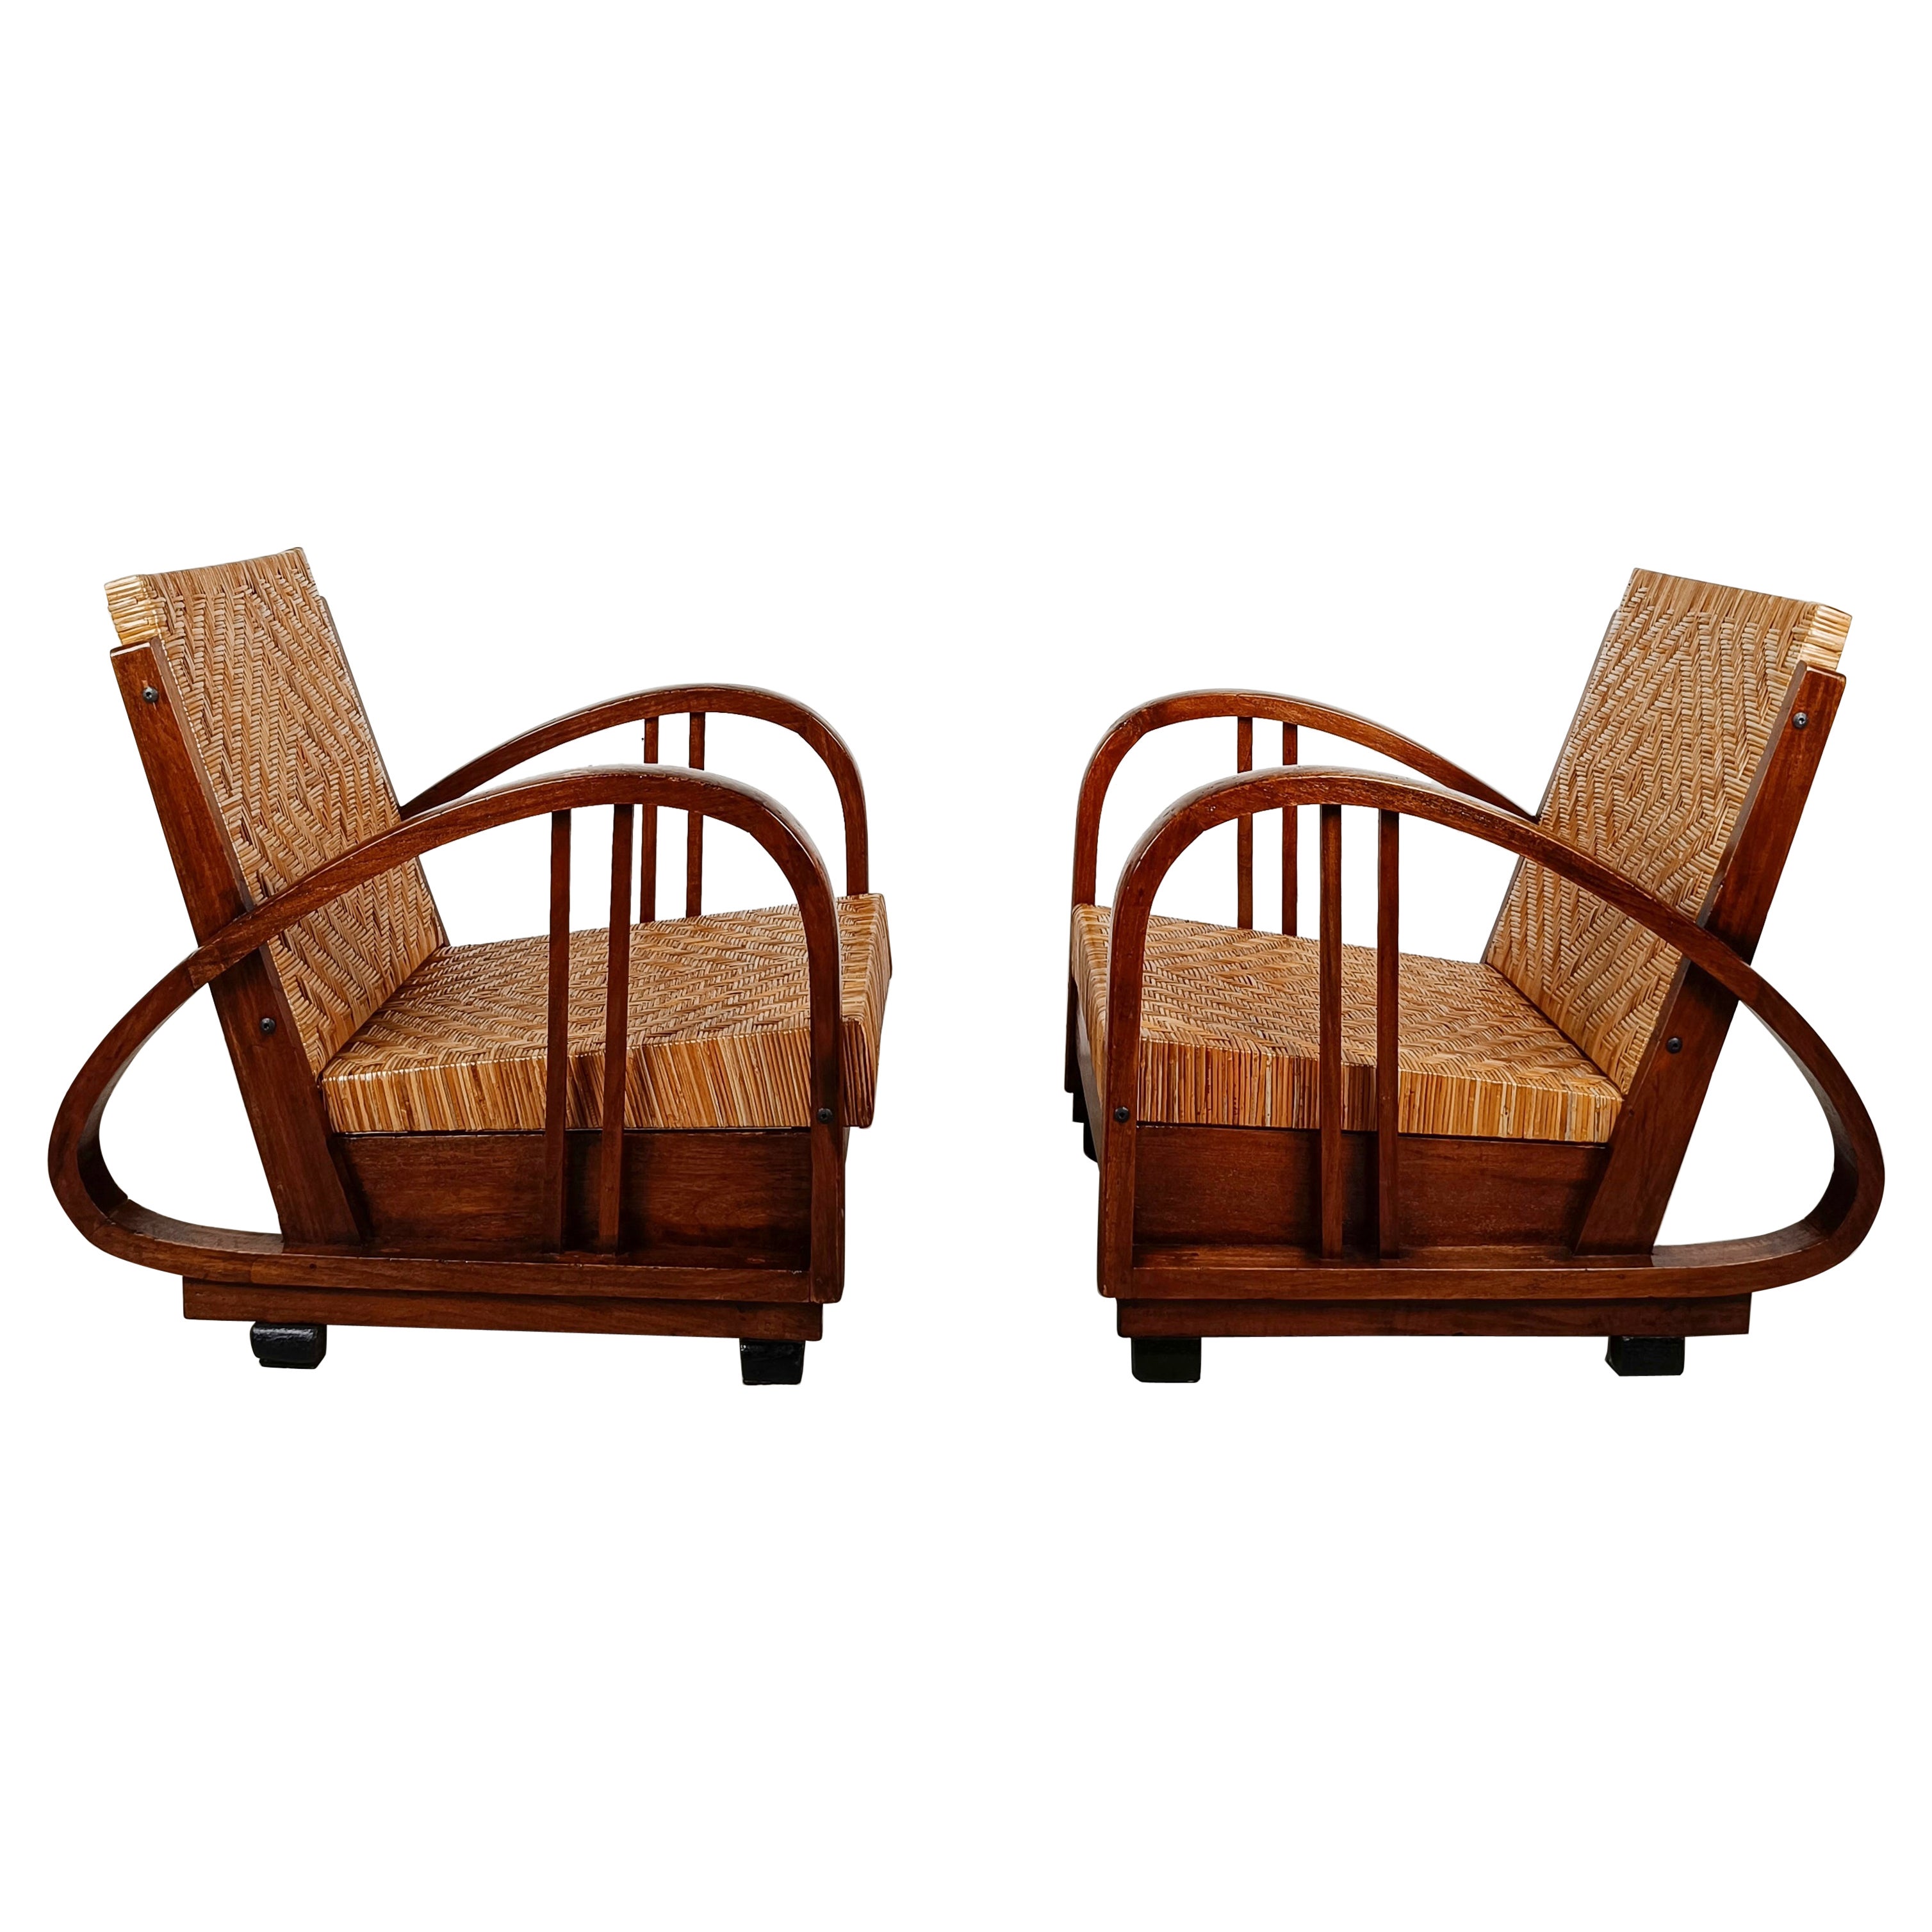 Pair of Art Deco Lounge Chairs in Teak and Cane in the Style of Francis Jourdain For Sale